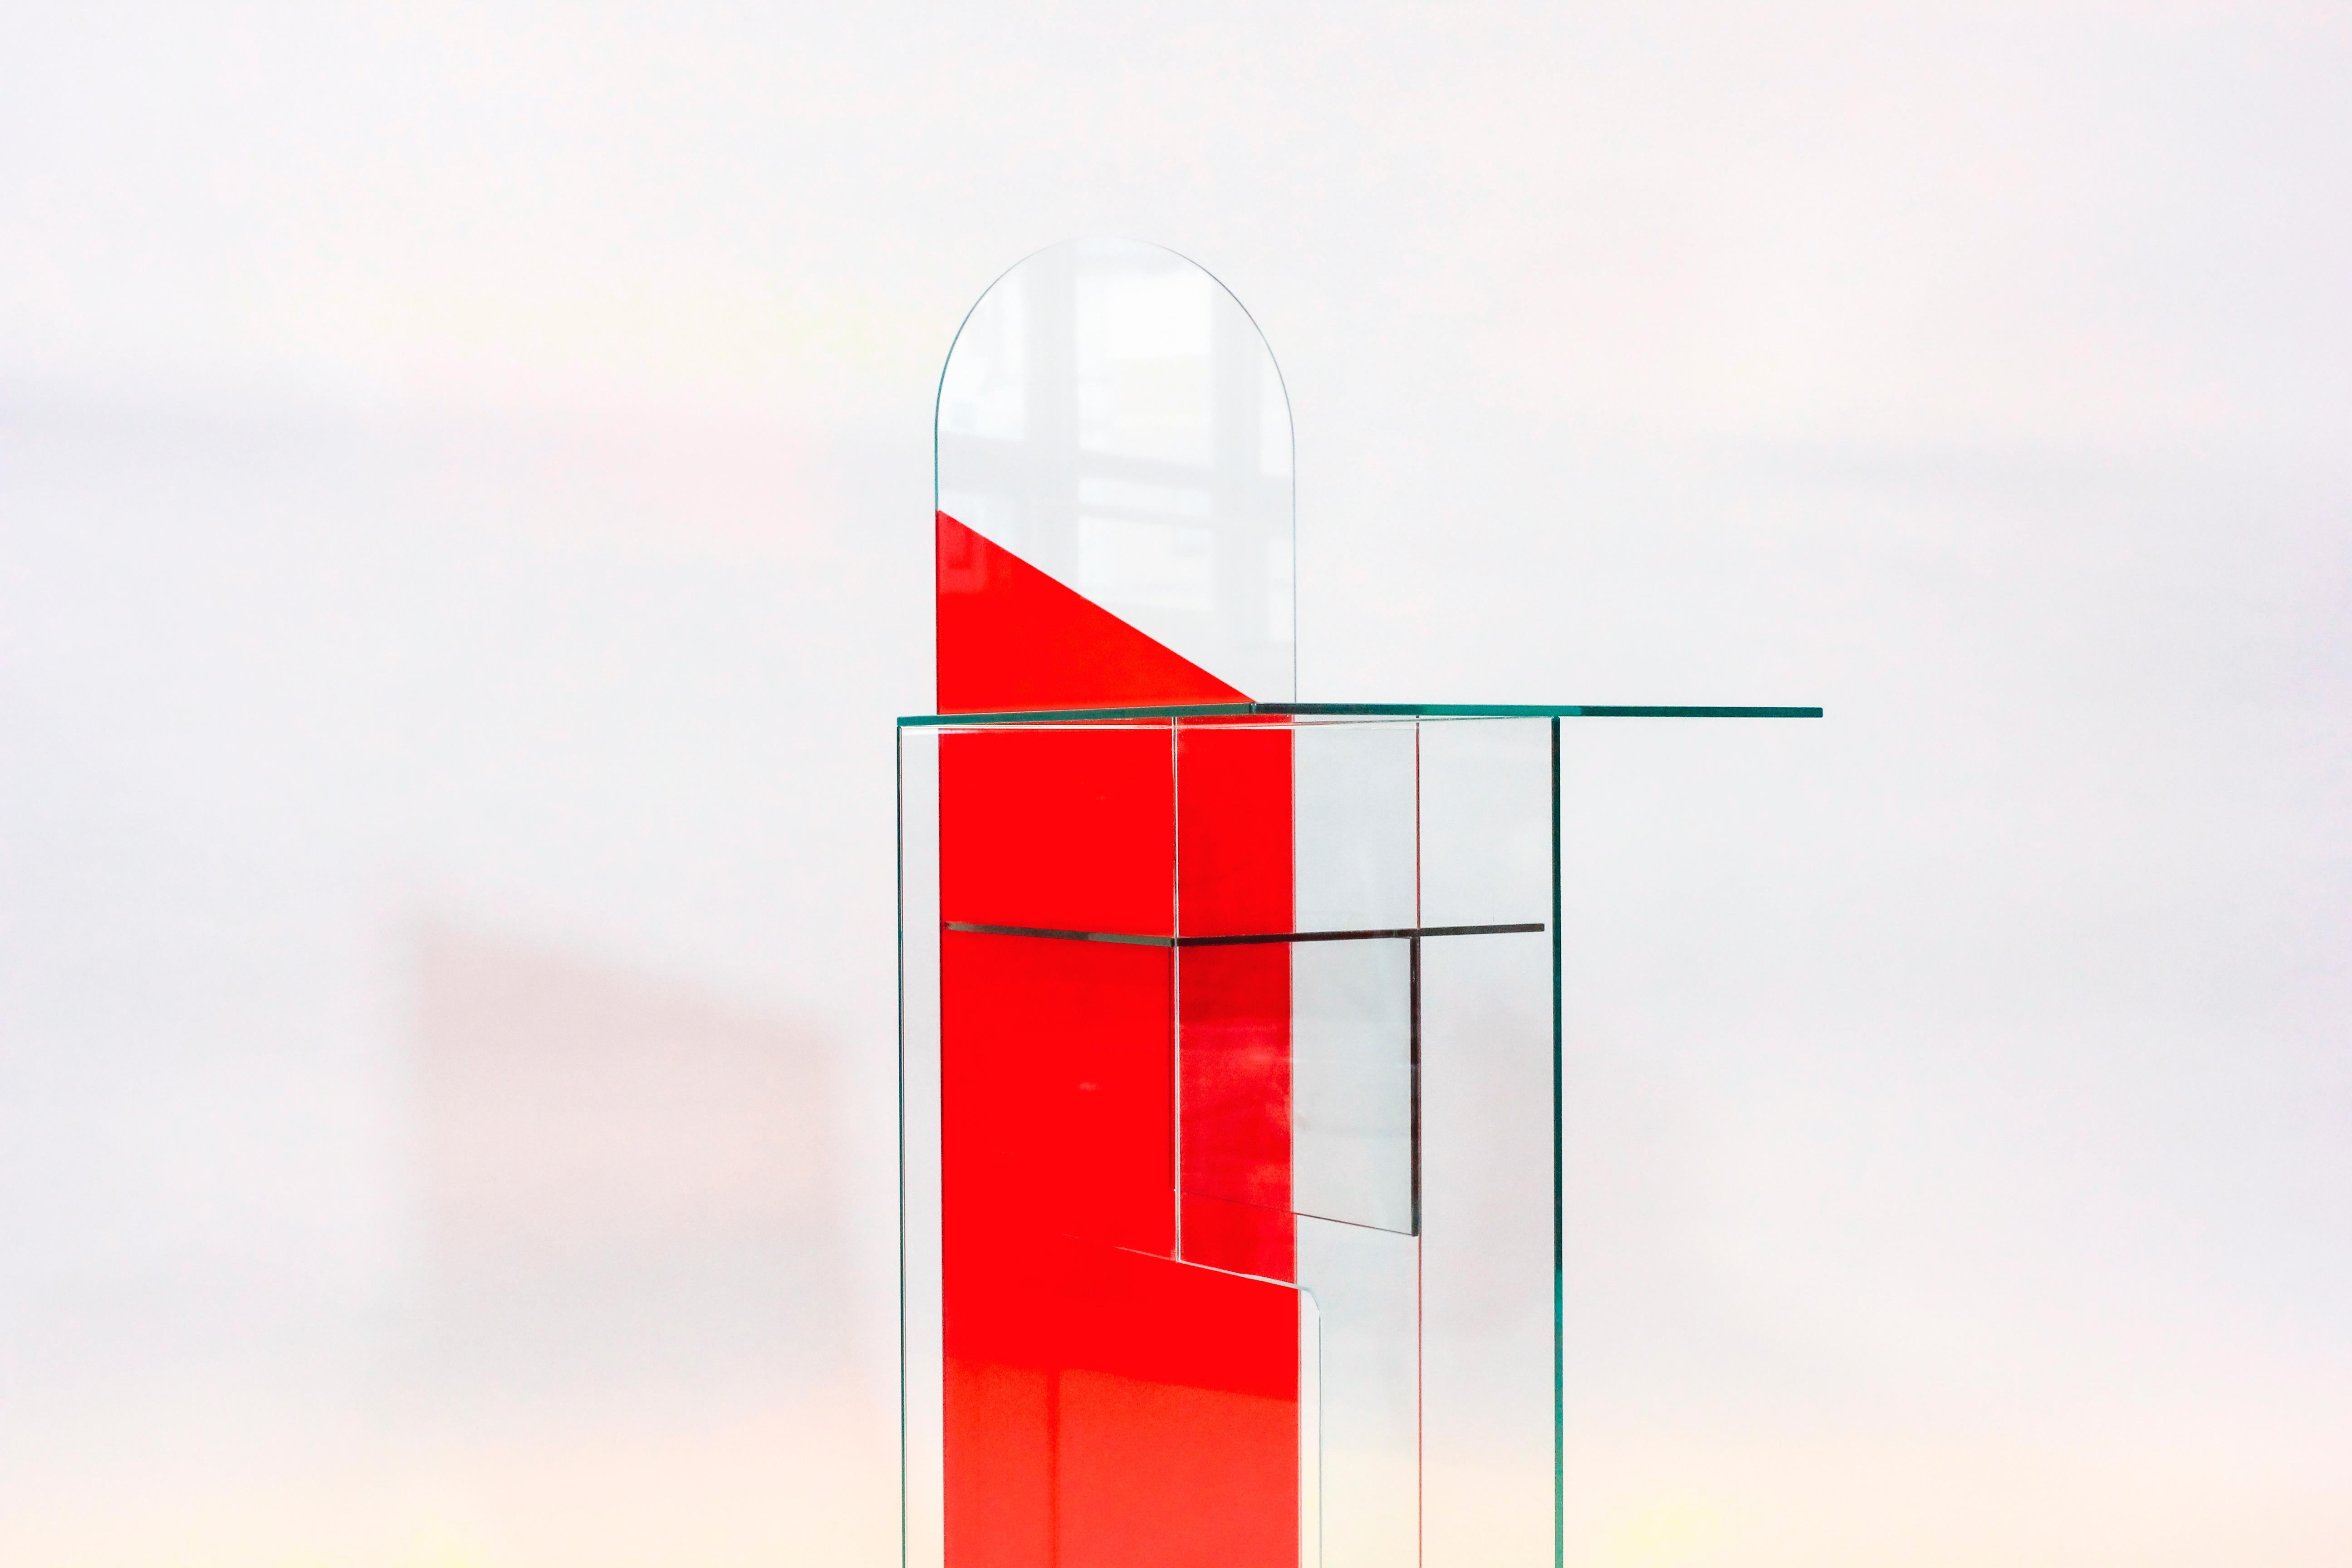 Mirrored glass contemporary Elaps table by Jan Farn Chi
Dimensions: L 686mm, W 480mm, H 1100mm
Material: 6mm toughened glass, 6mm mirrored glass. Tint film
Elaps’ is a glass centerpiece table that evolves with the changing daylight, thanks to its